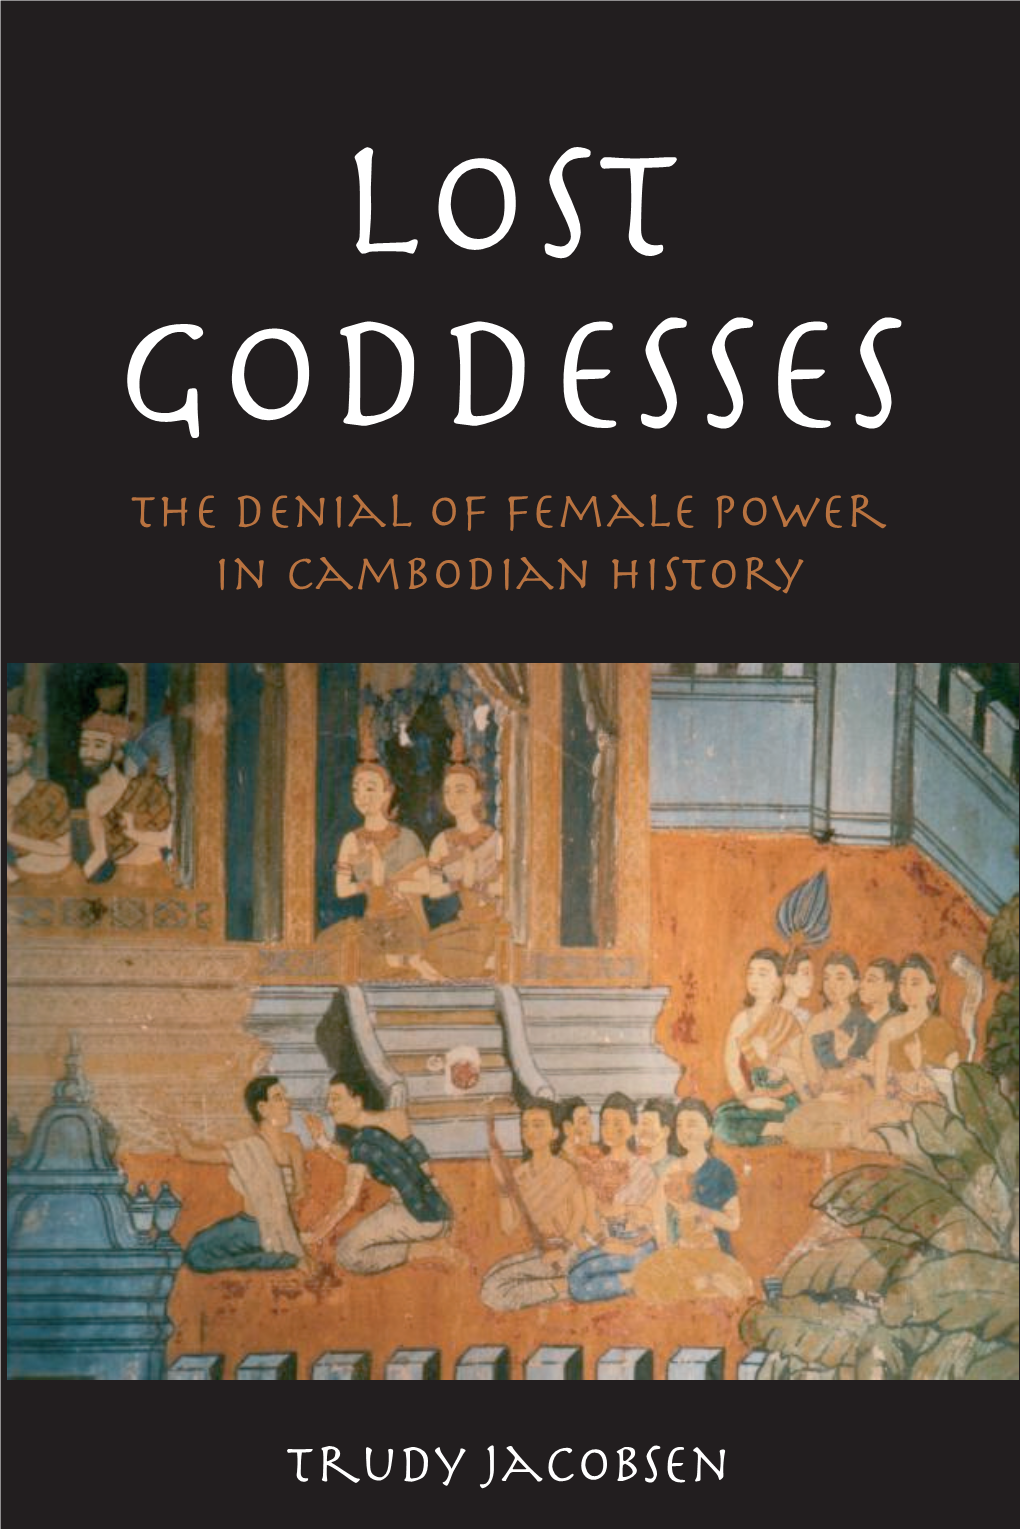 The Denial of Female Power in Cambodian History Trudy Jacobsen